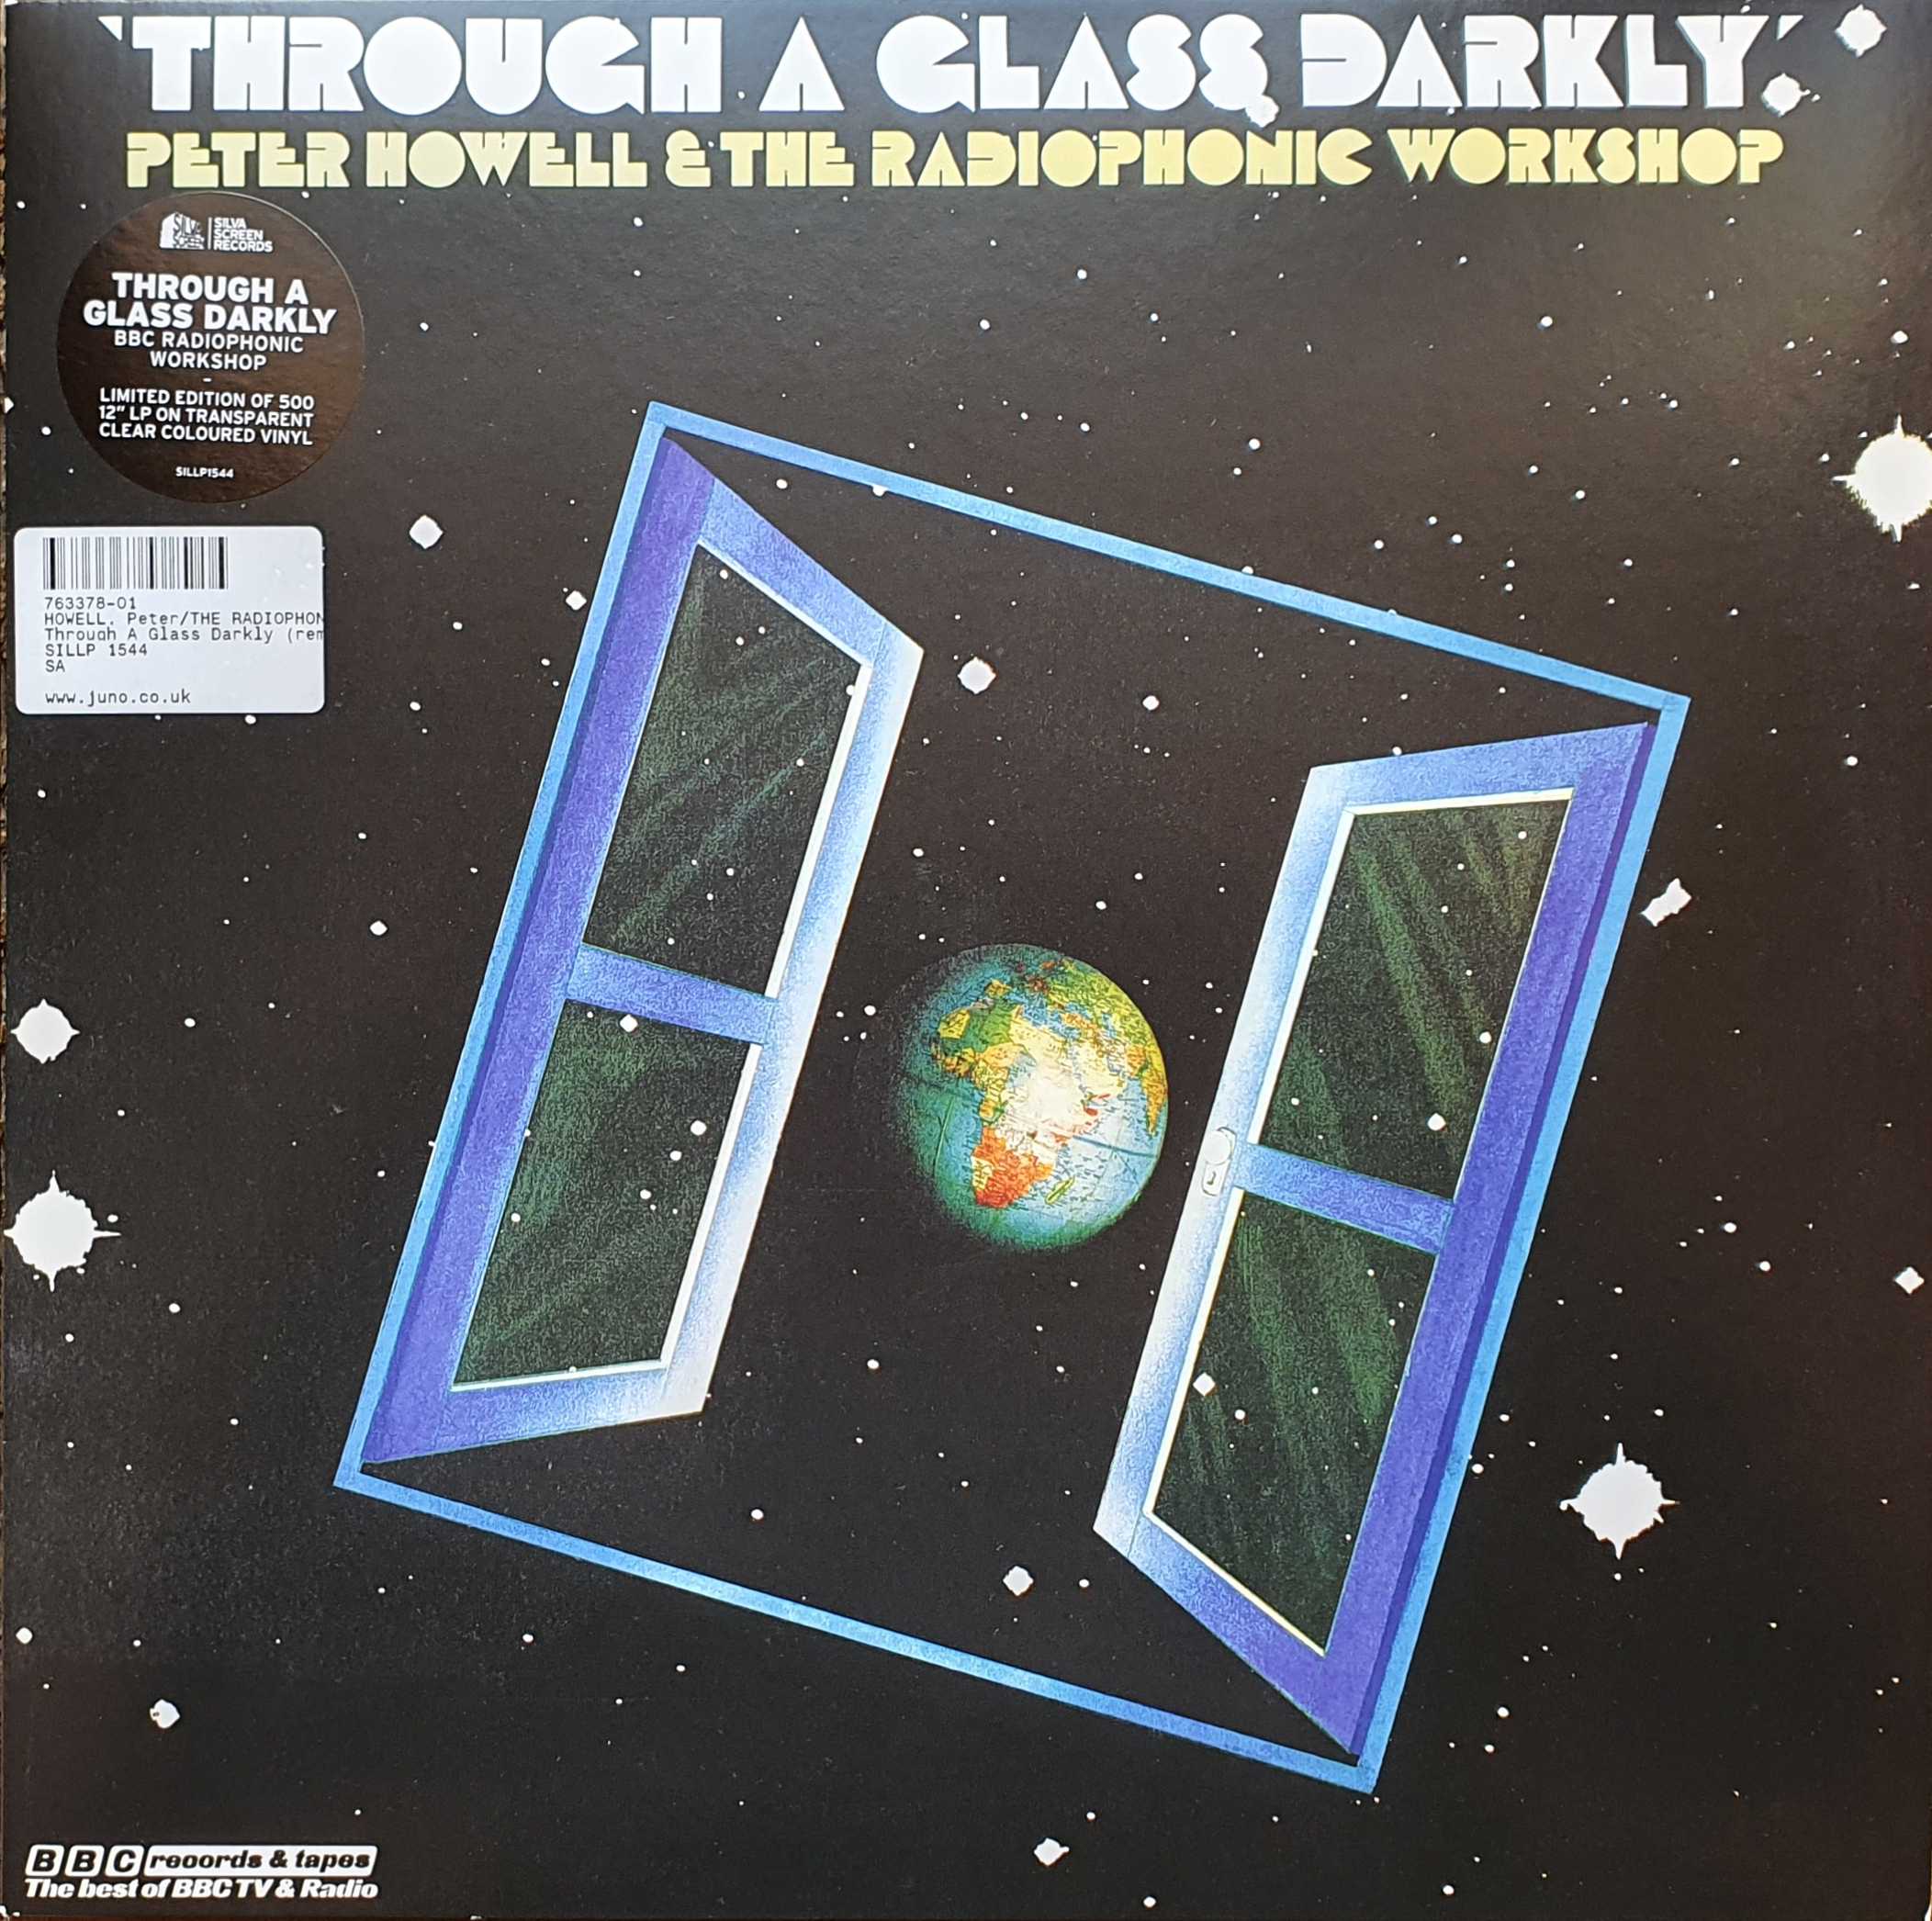 Picture of SILLP 1544 Through a glass darkly by artist Peter Howell and the BBC Radiophonic Workshop from the BBC records and Tapes library